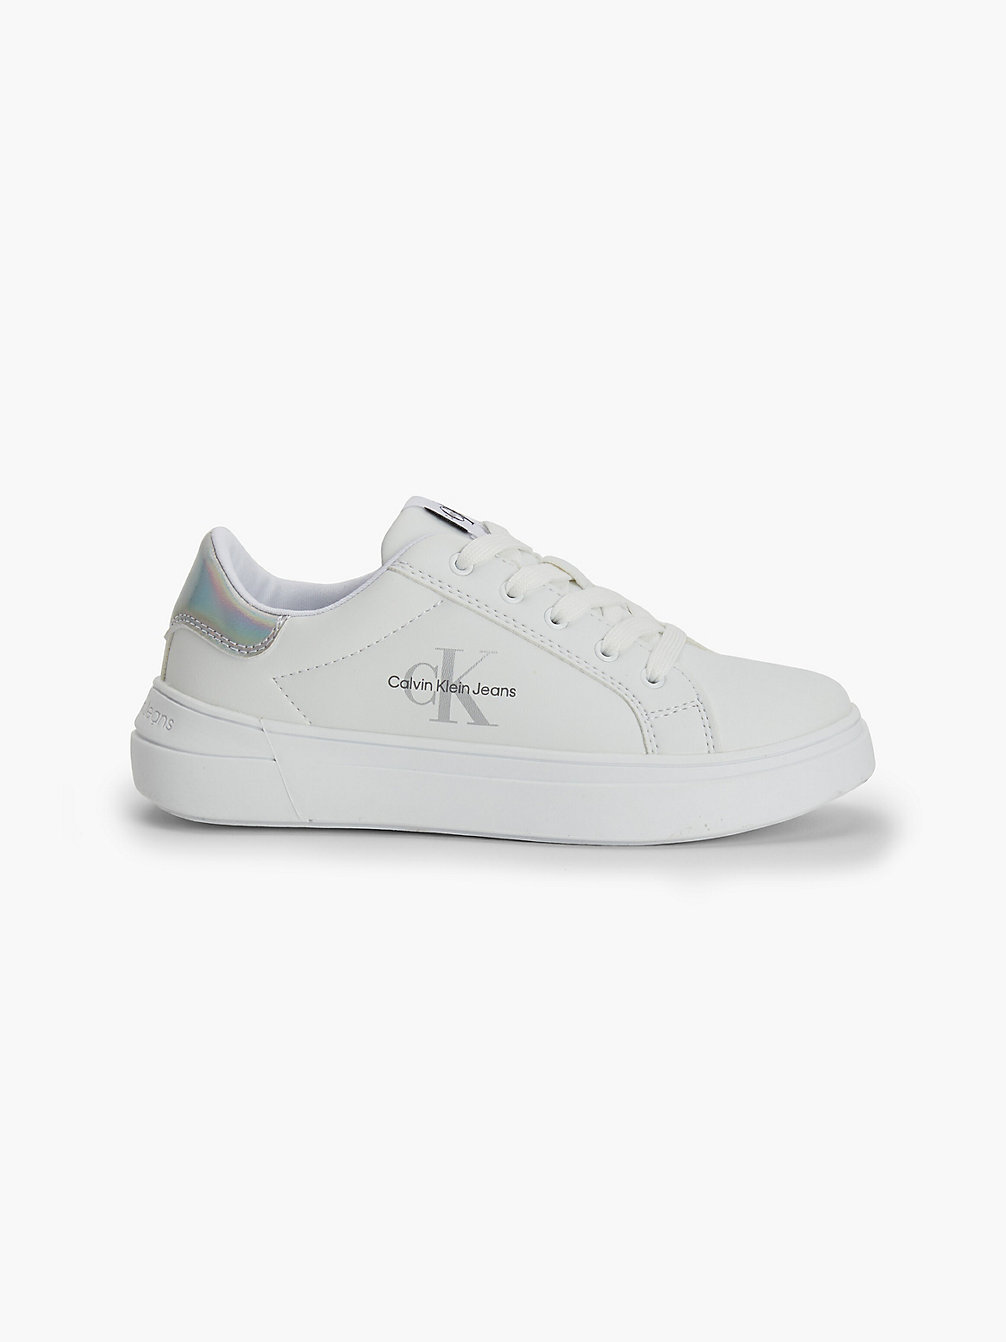 WHITE/SILVER Recycled Kids Trainers undefined kids unisex Calvin Klein